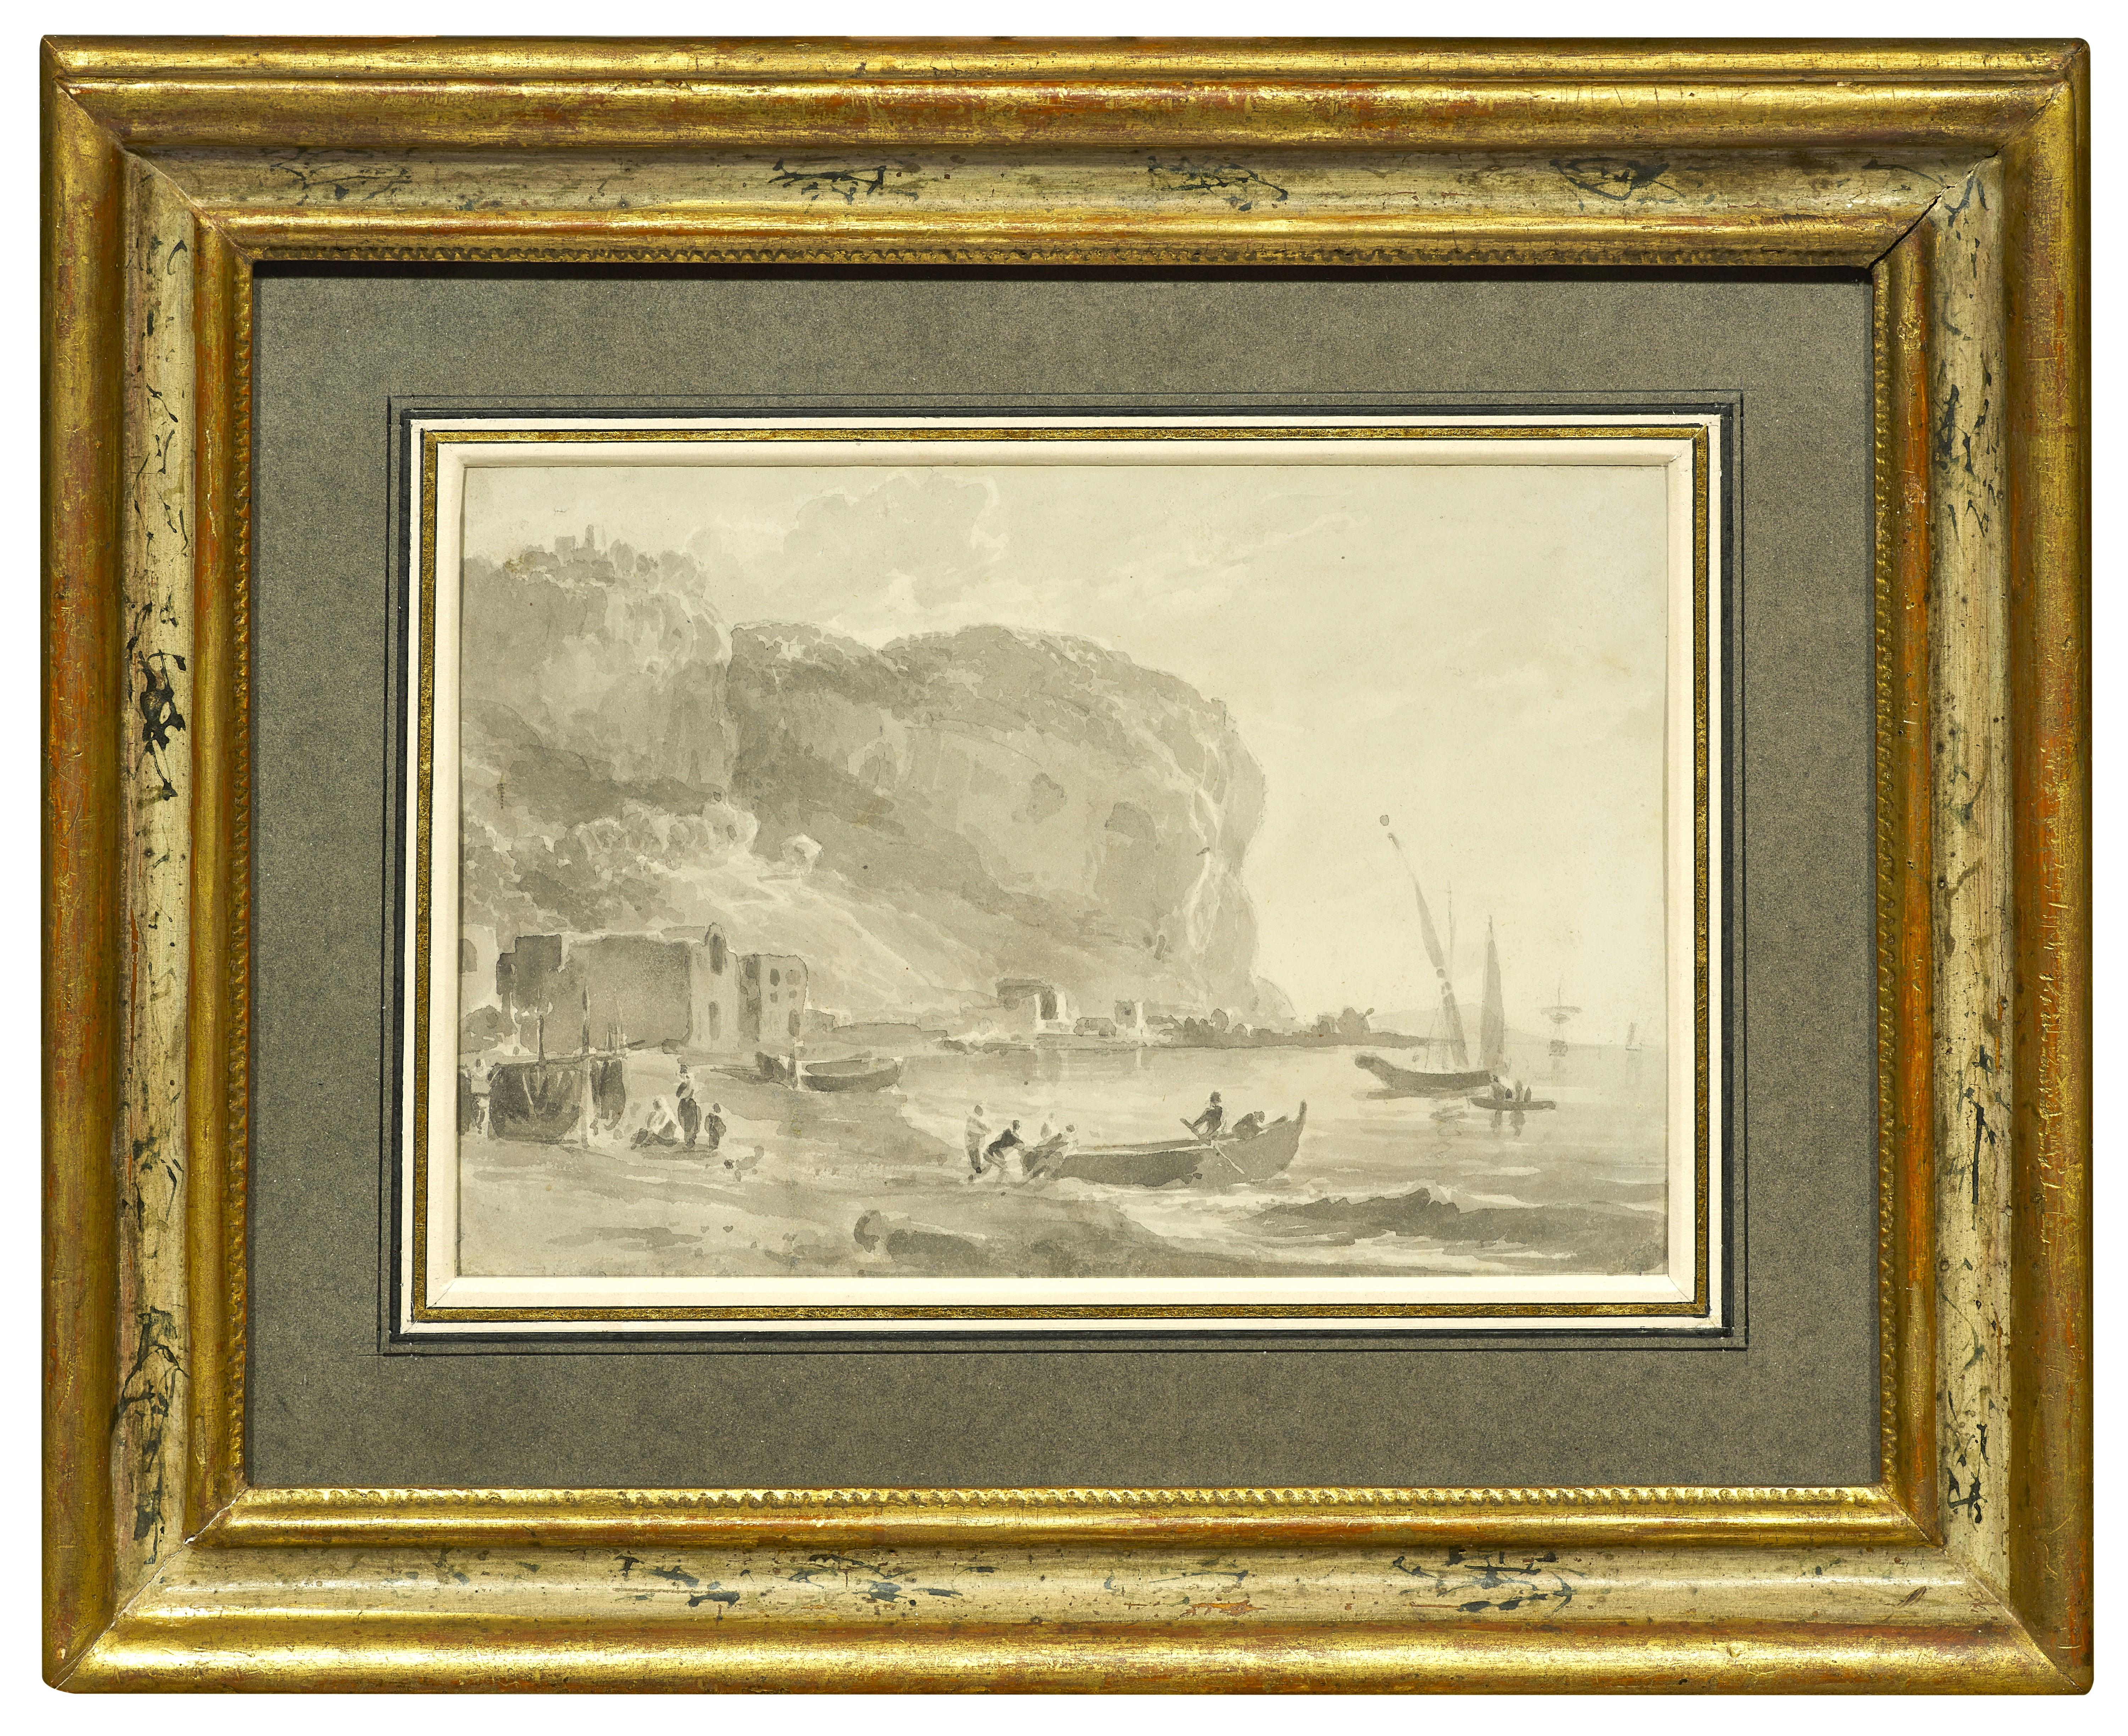 In this drawing, inspired by his stay in Naples in 1765, William Marlow presents us with a view of Cape Posillipo, to the west of Naples, an essential stage during the Grand Tour. The drawing appealed to us because of the velvety softness of the